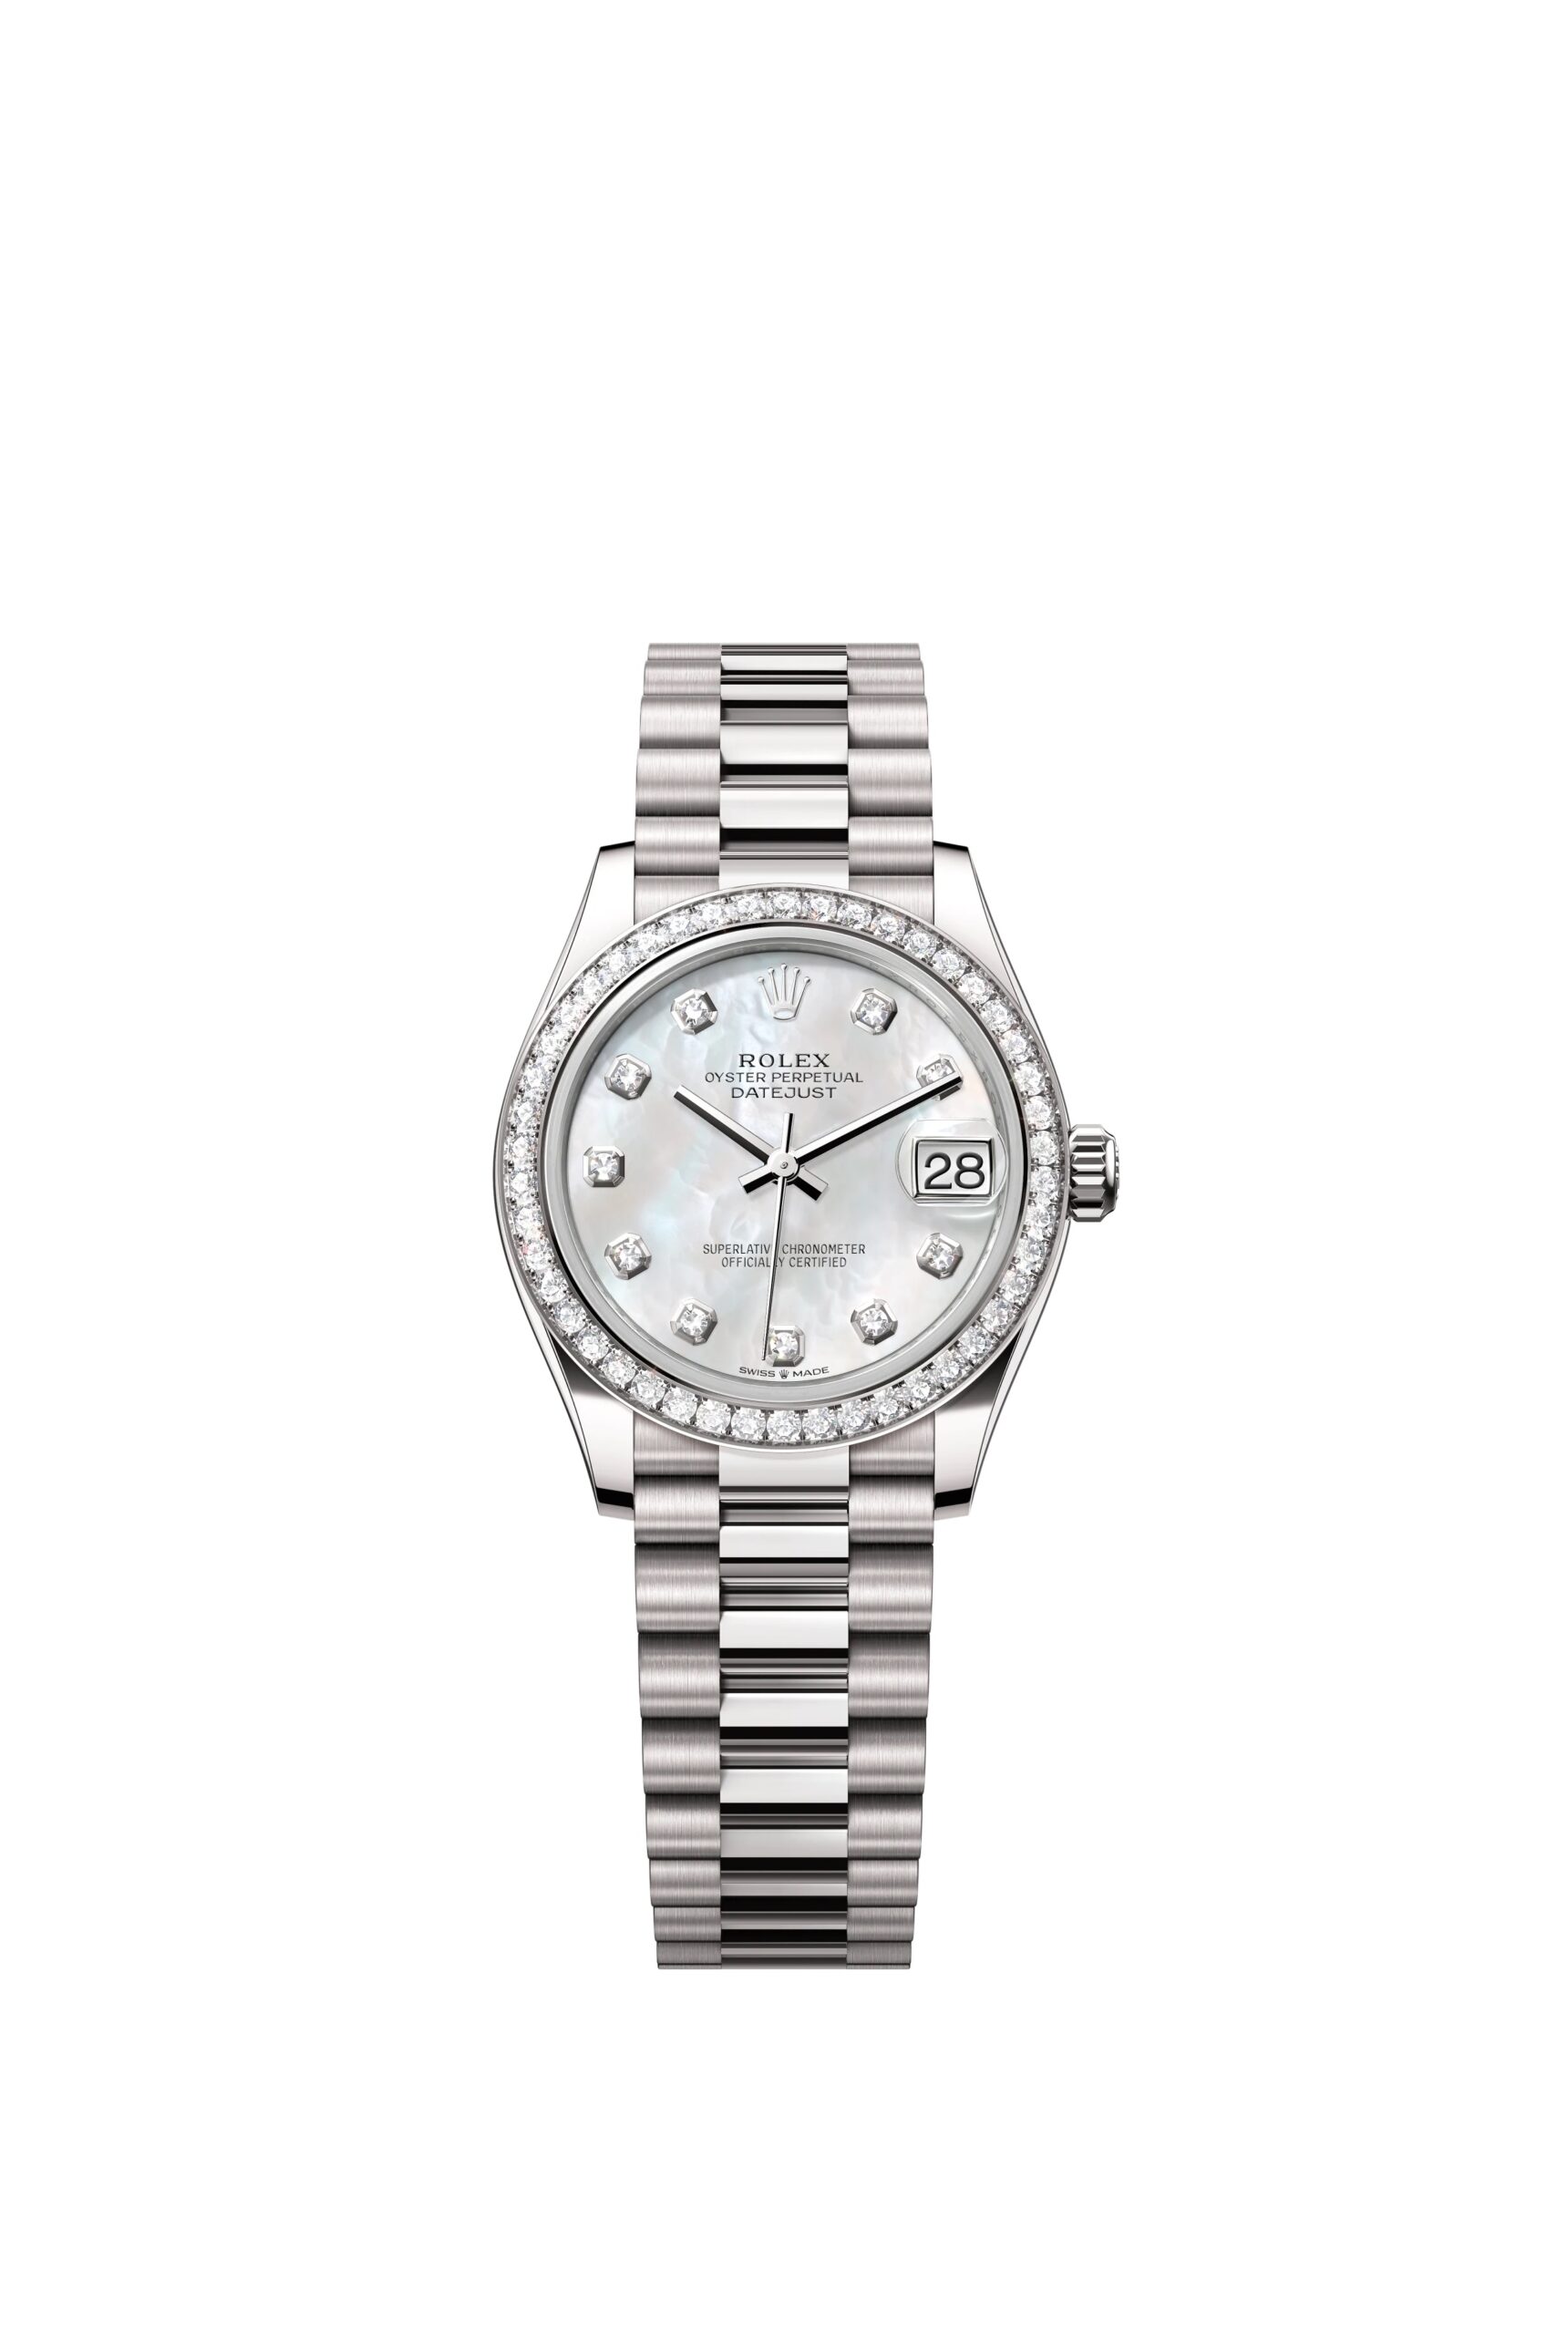 Rolex Datejust 31 Oyster, 31 mm, white gold and diamonds Reference 278289RBR